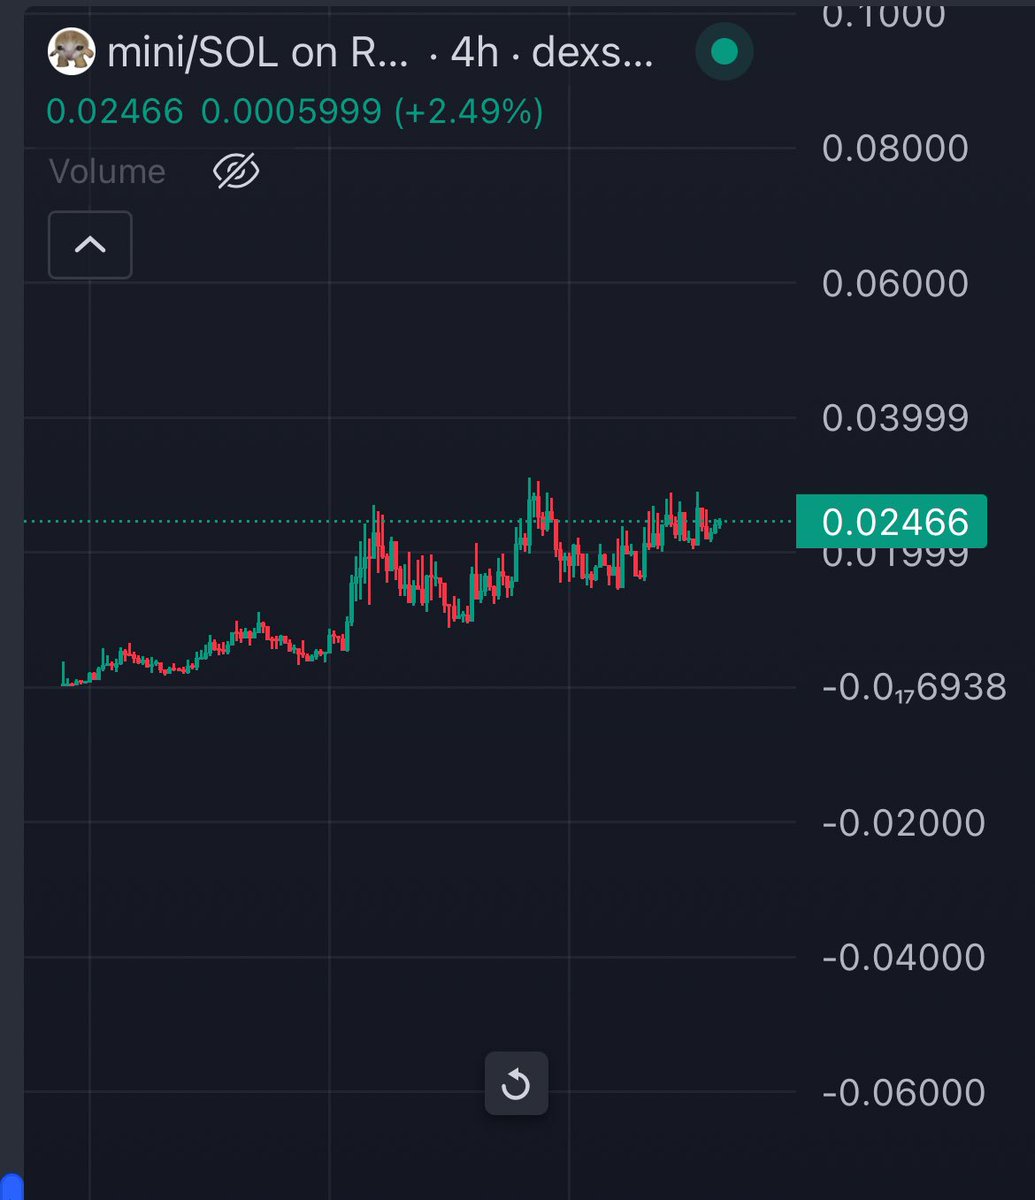 One of my fav cat and community $Mini 

Outperforming market,outperforming other tickers. 

nothing to say here,chart is bullish af

much higher bros